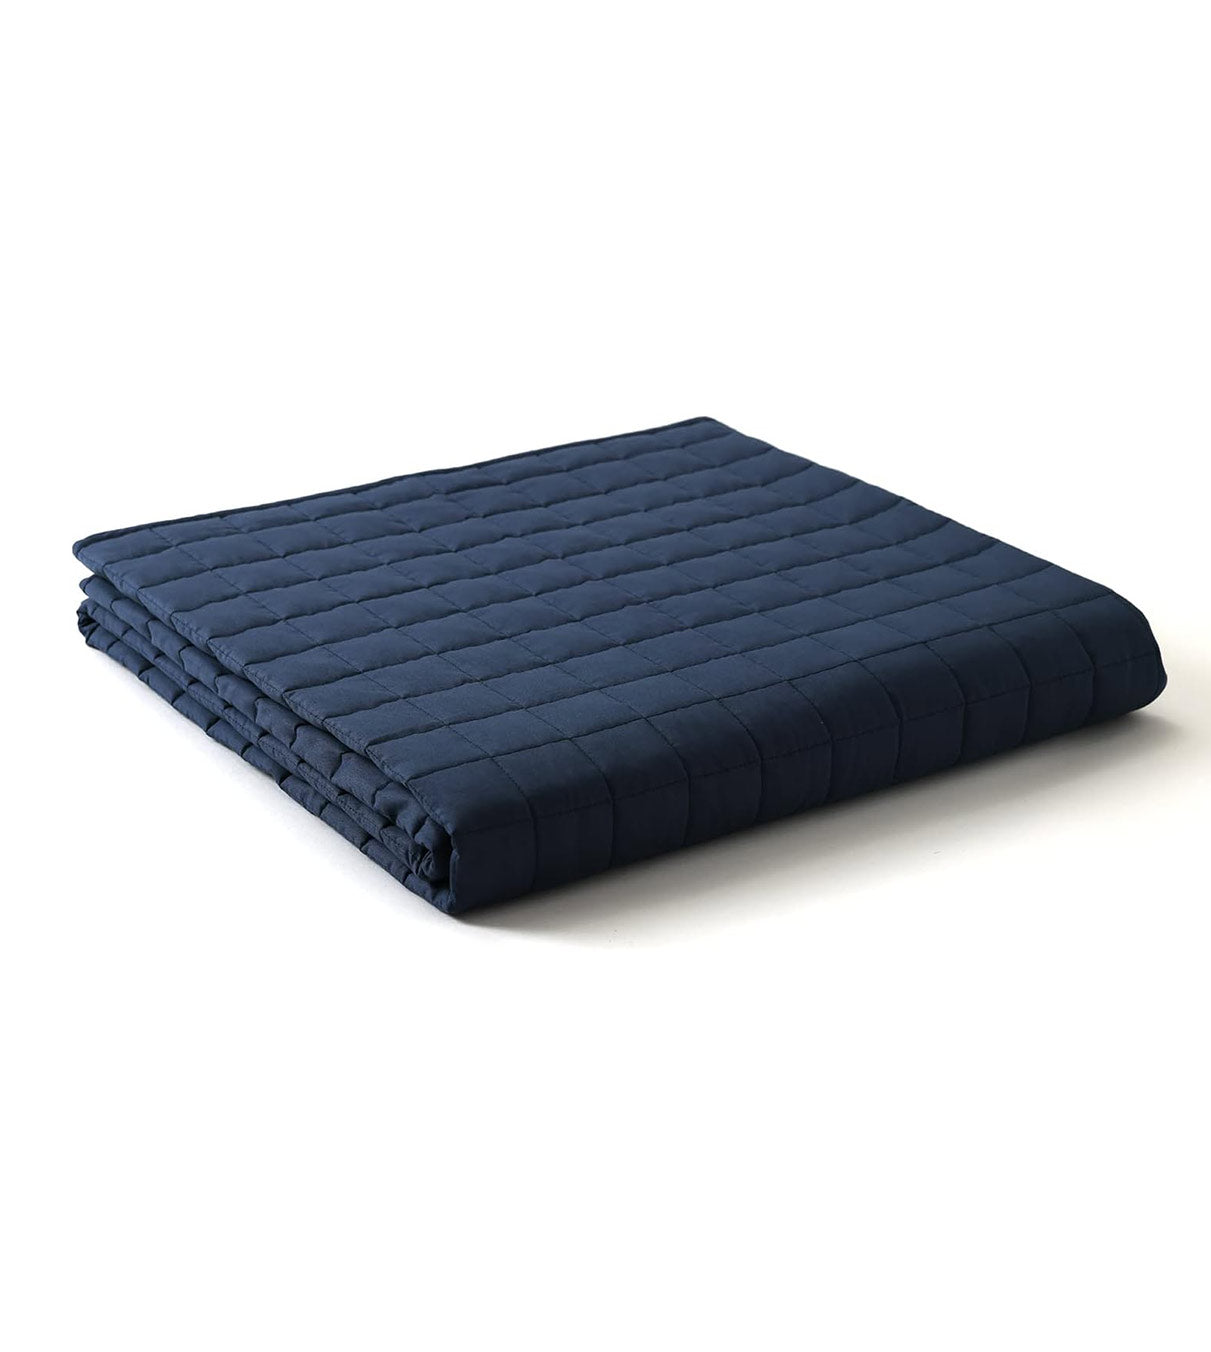 Product: 12lb Weighted Blanket | Color: Cotton Navy 3.0